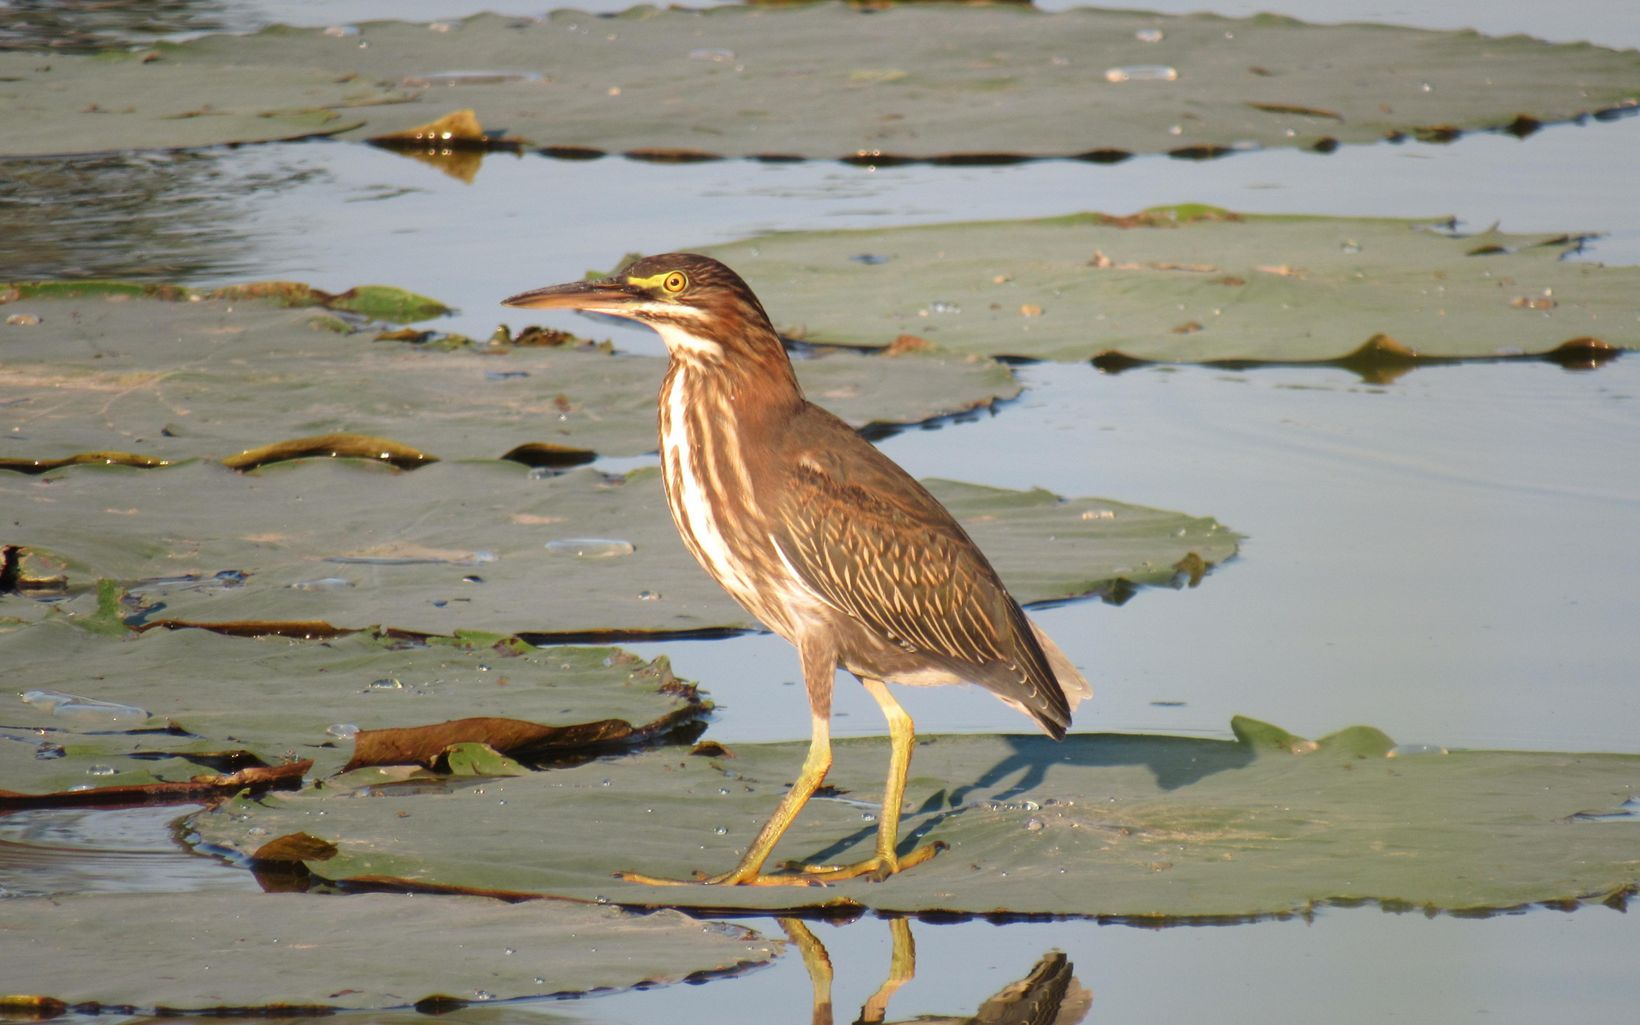 A green heron standing on a lily pad in water.